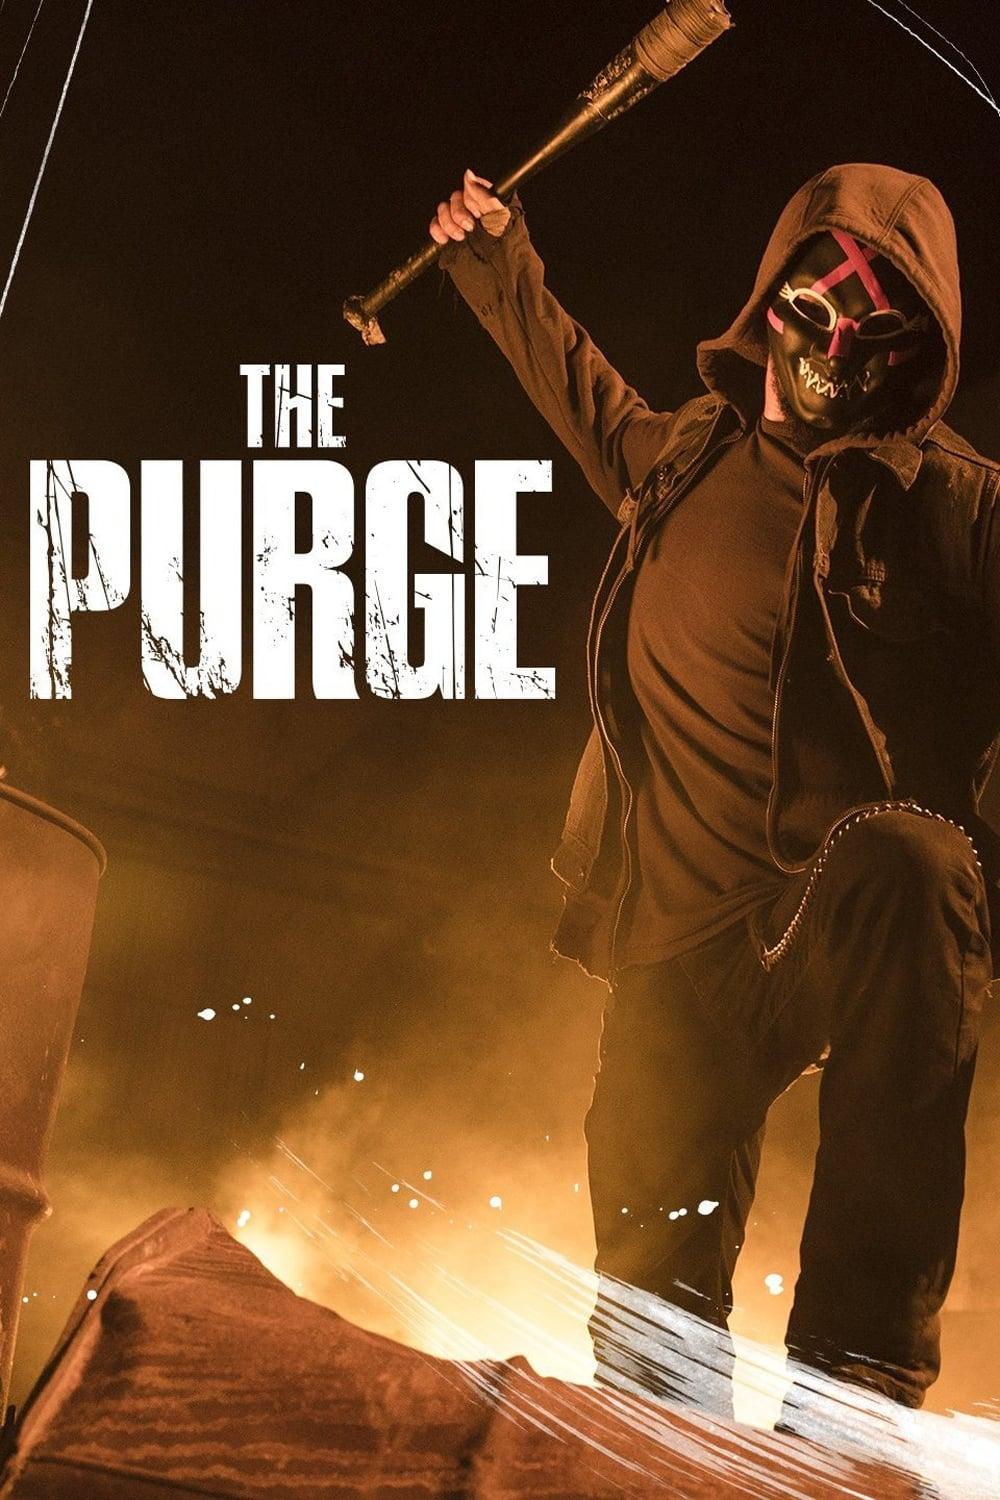 The Purge poster